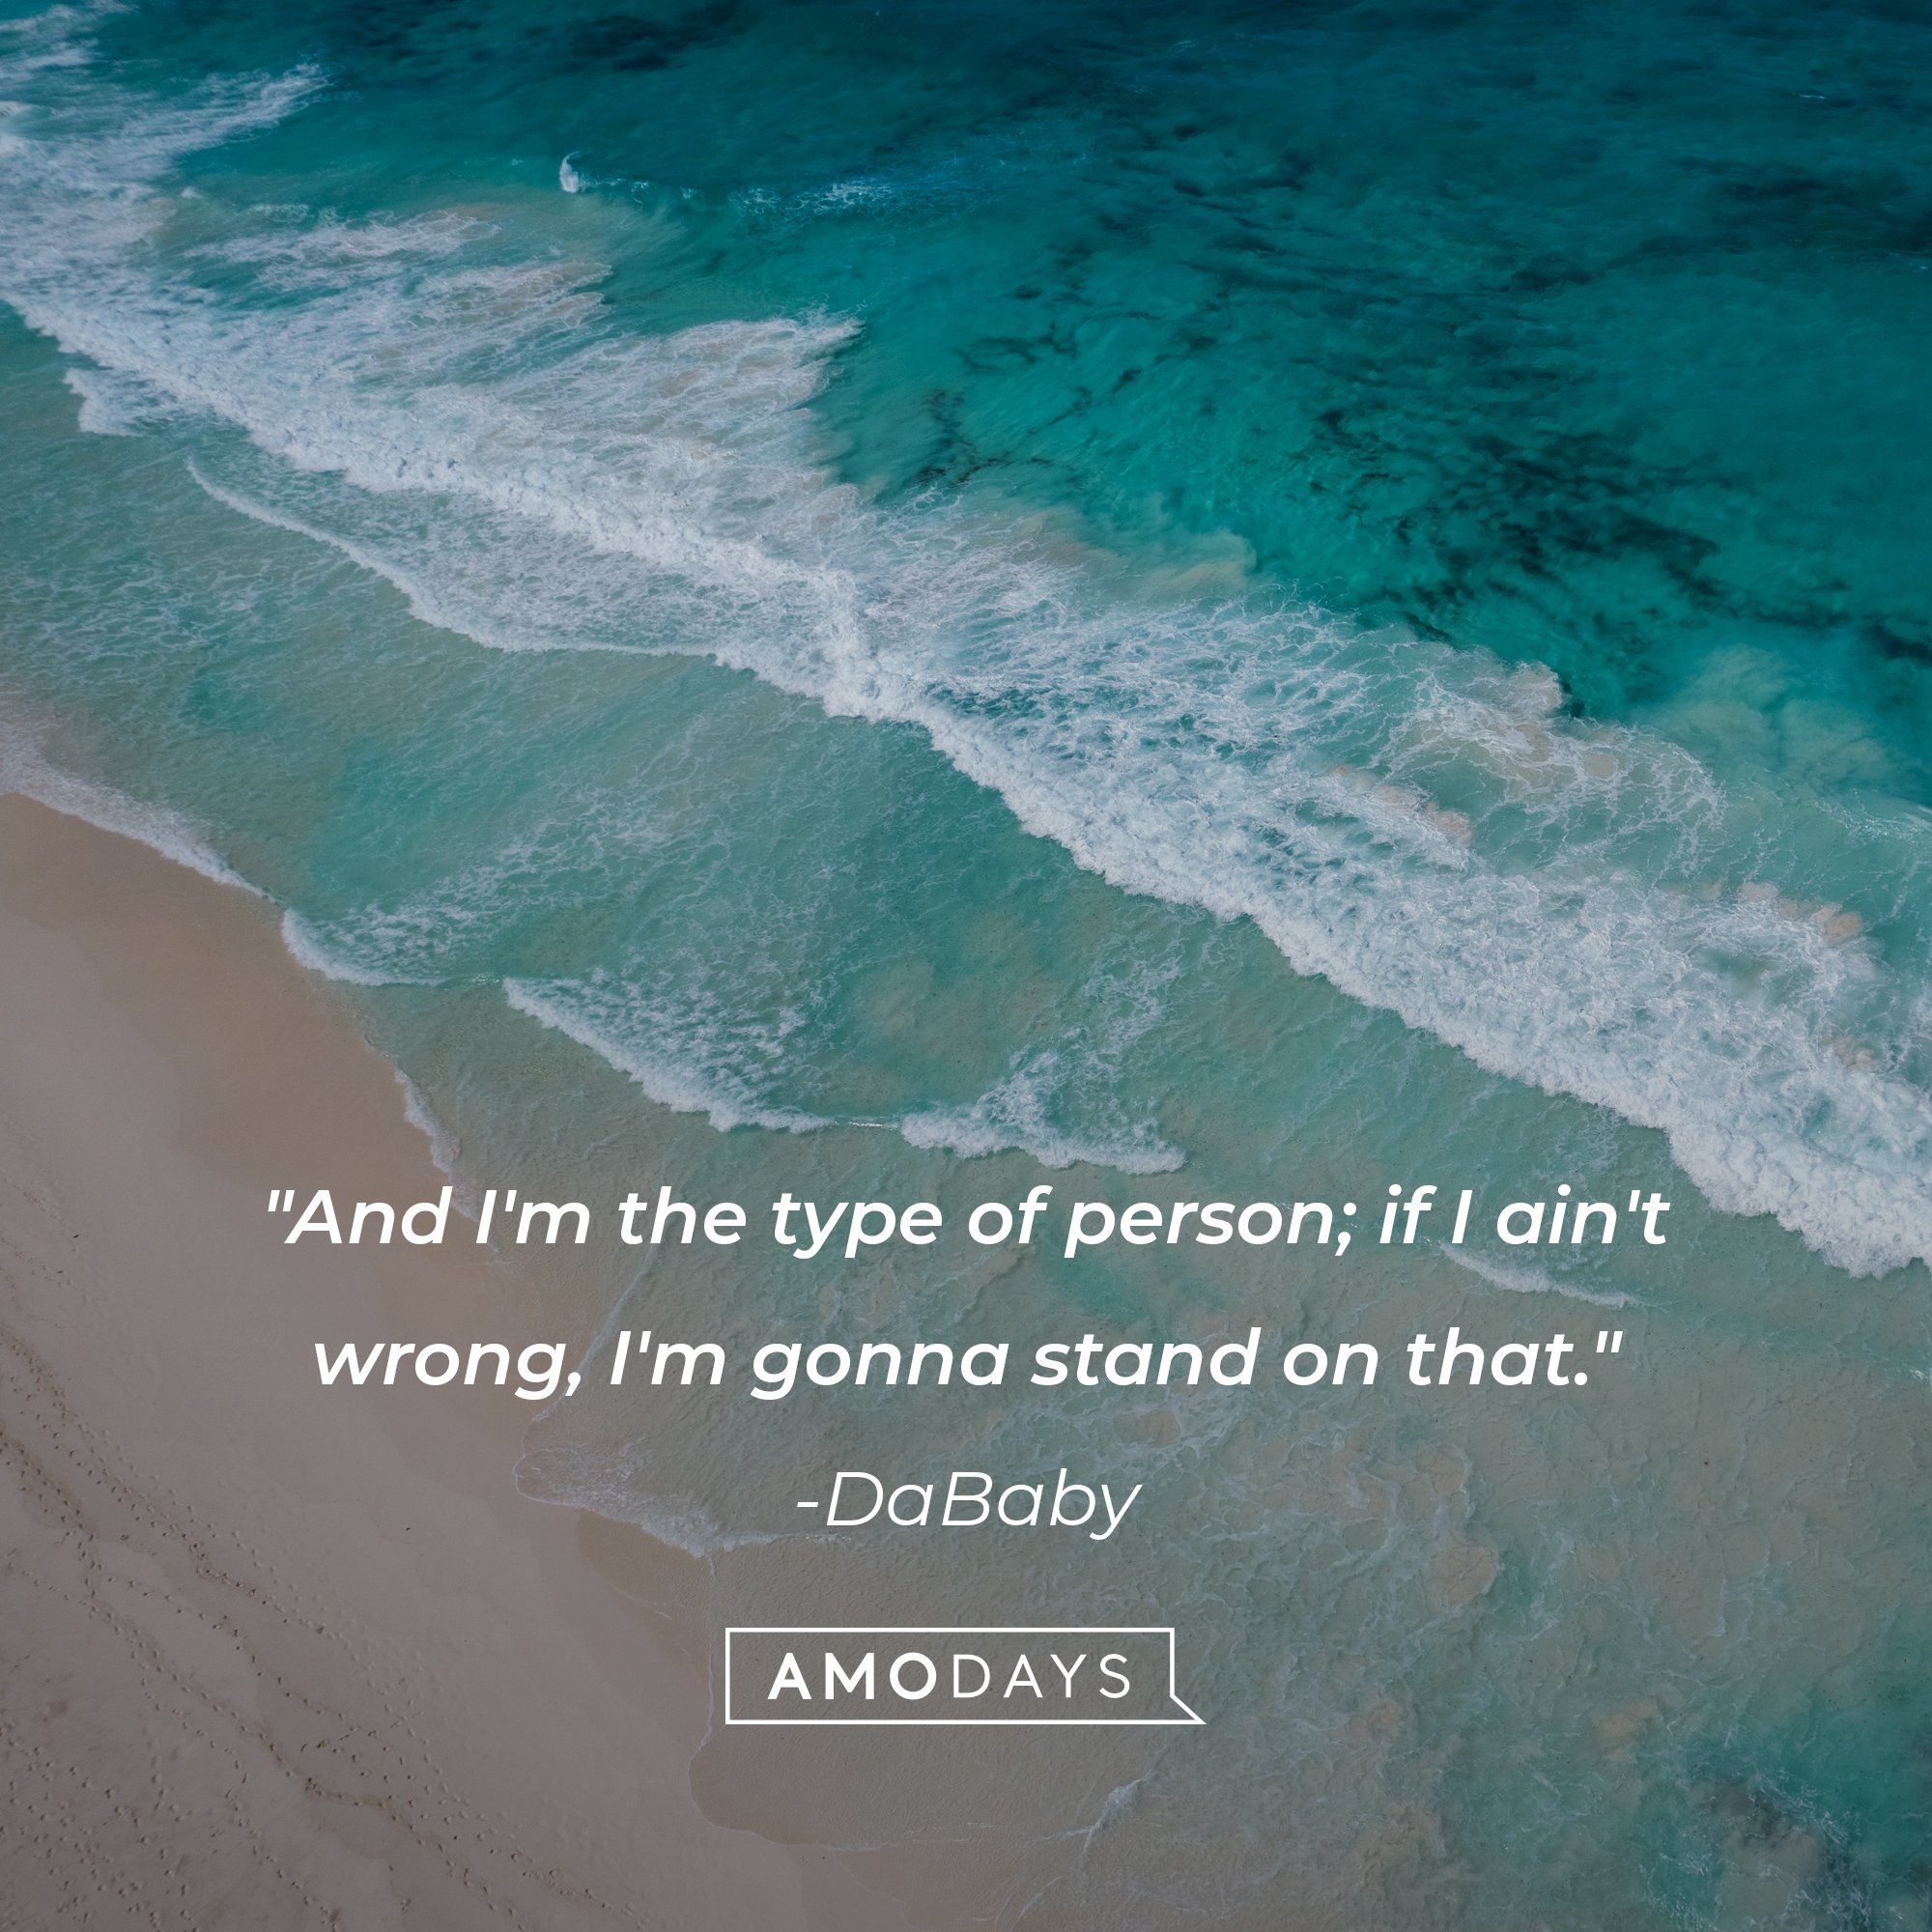 DaBaby‘s quote: "And I'm the type of person; if I ain't wrong, I'm gonna stand on that." | Image: AmoDays